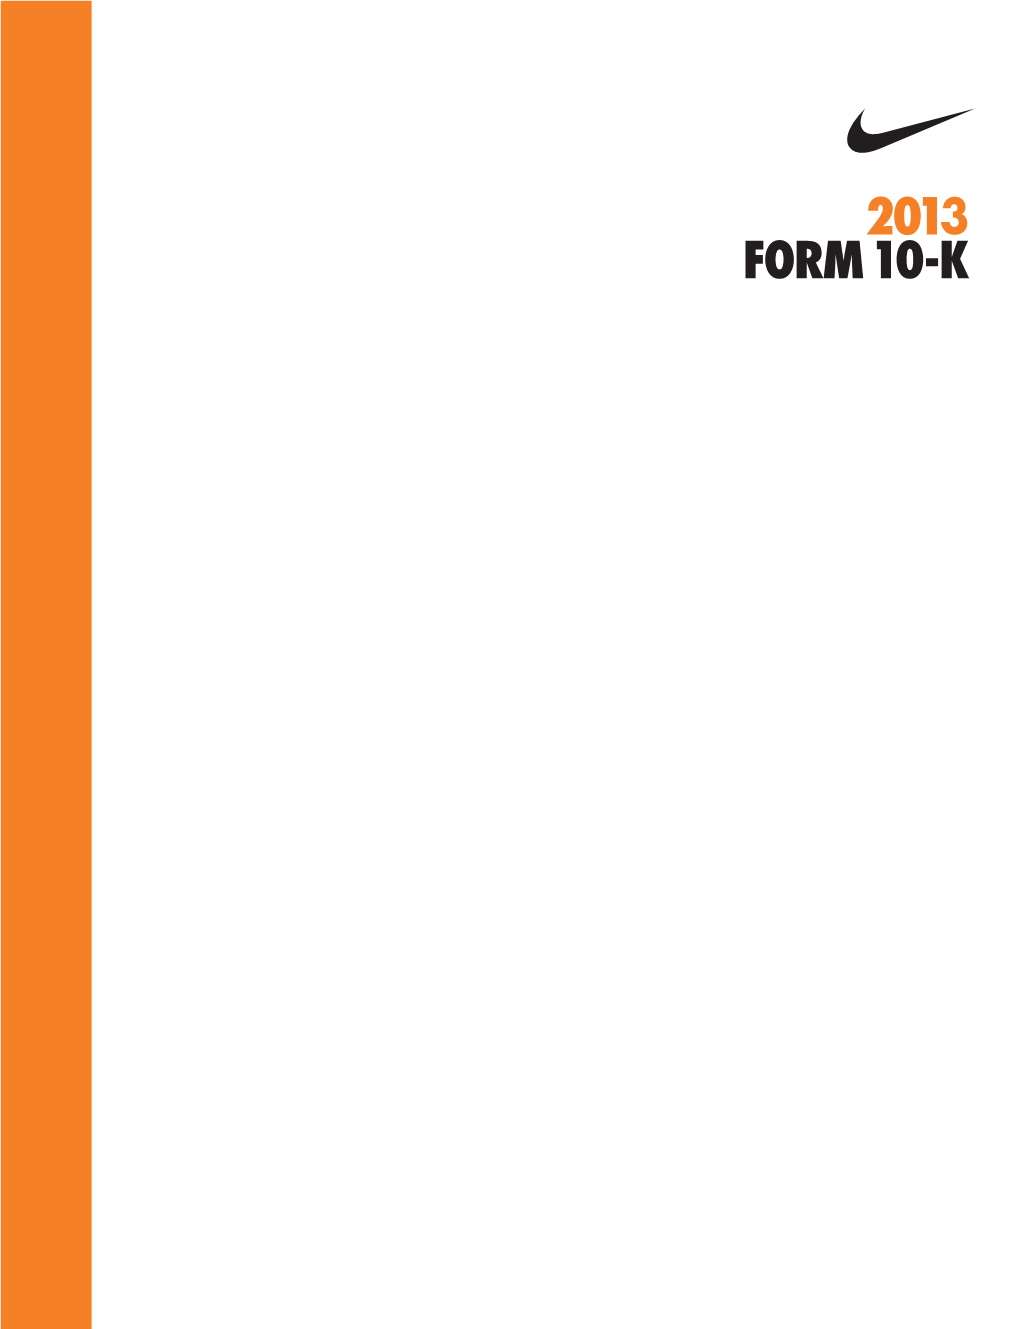 NIKE, INC. ANNUAL REPORT on FORM 10-K Table of Contents Page PART I 49